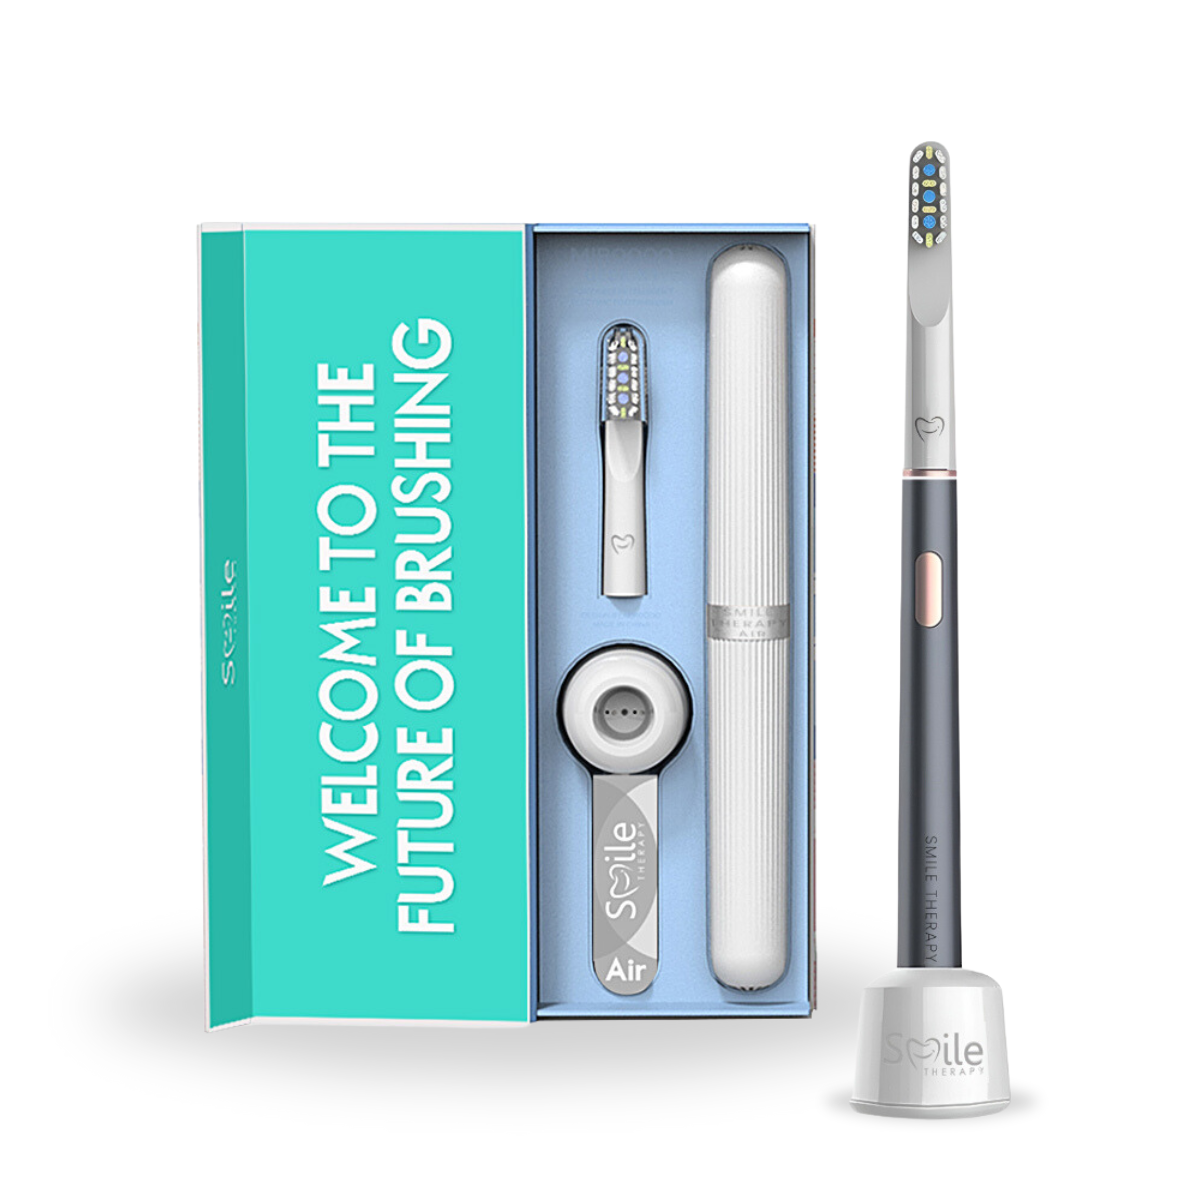 Air Advanced Electric Toothbrush 3-in-1 DP3